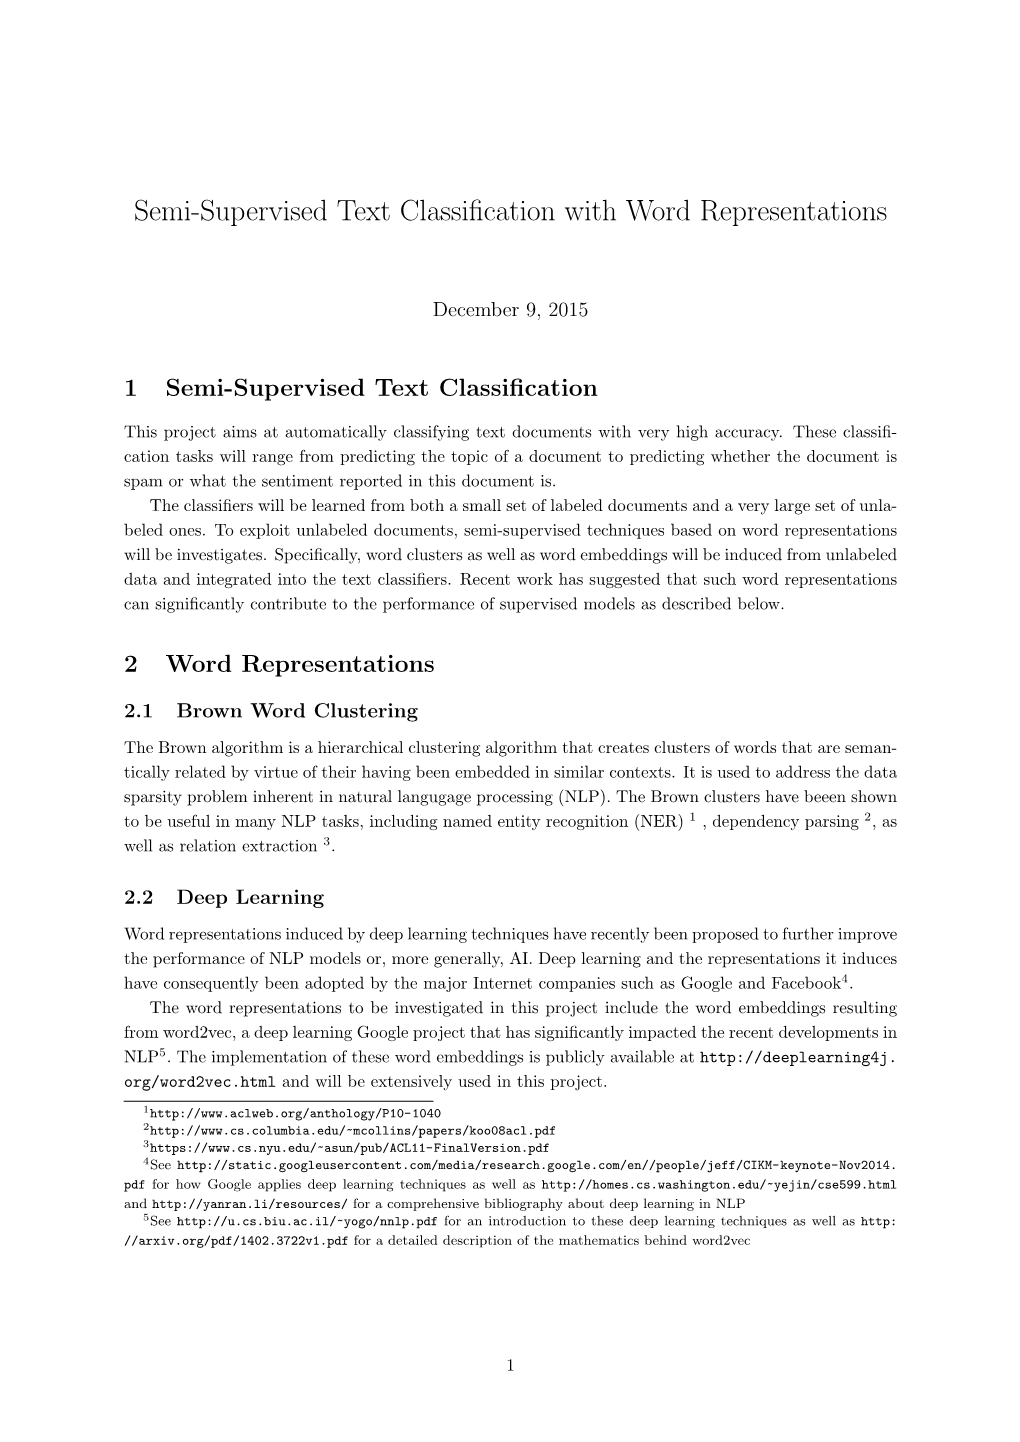 Semi-Supervised Text Classification with Word Representations